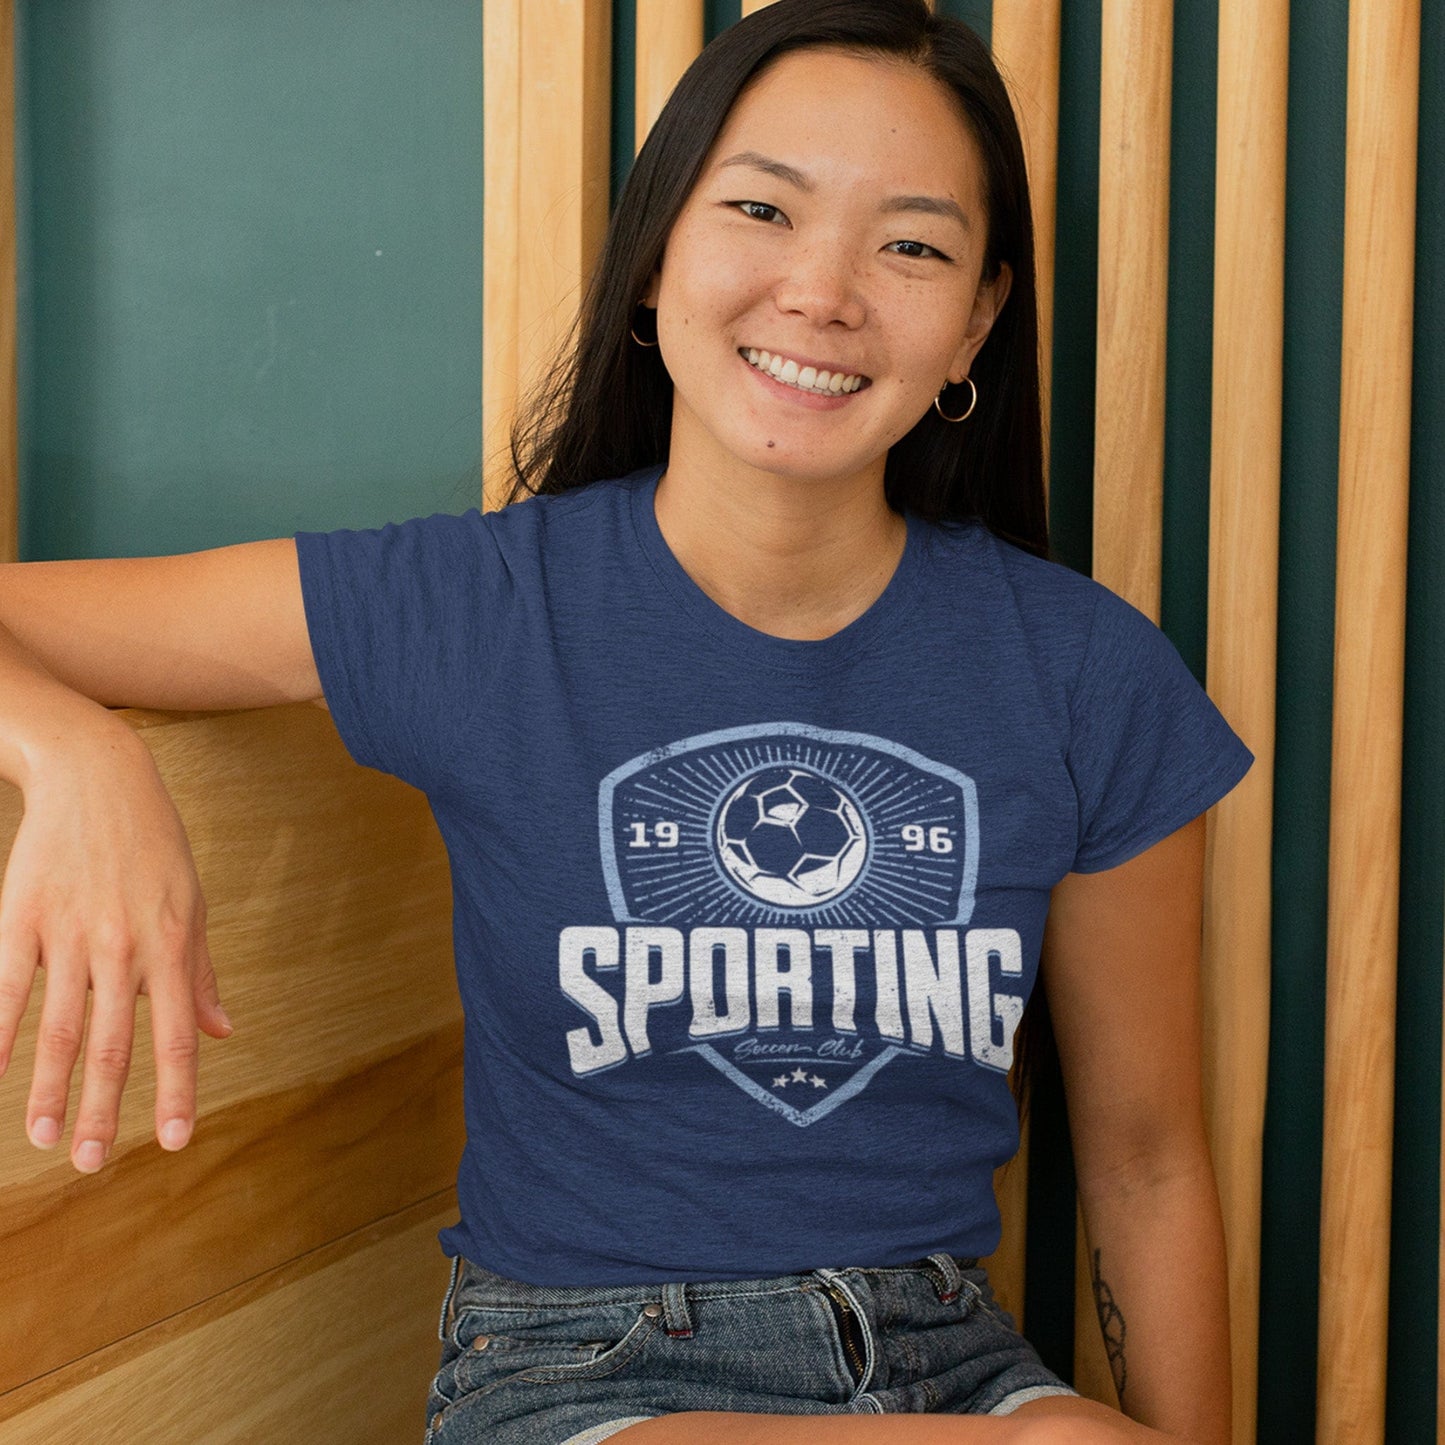 on heather navy unisex t-shirt worn by female model sitting in front of wood slat wall